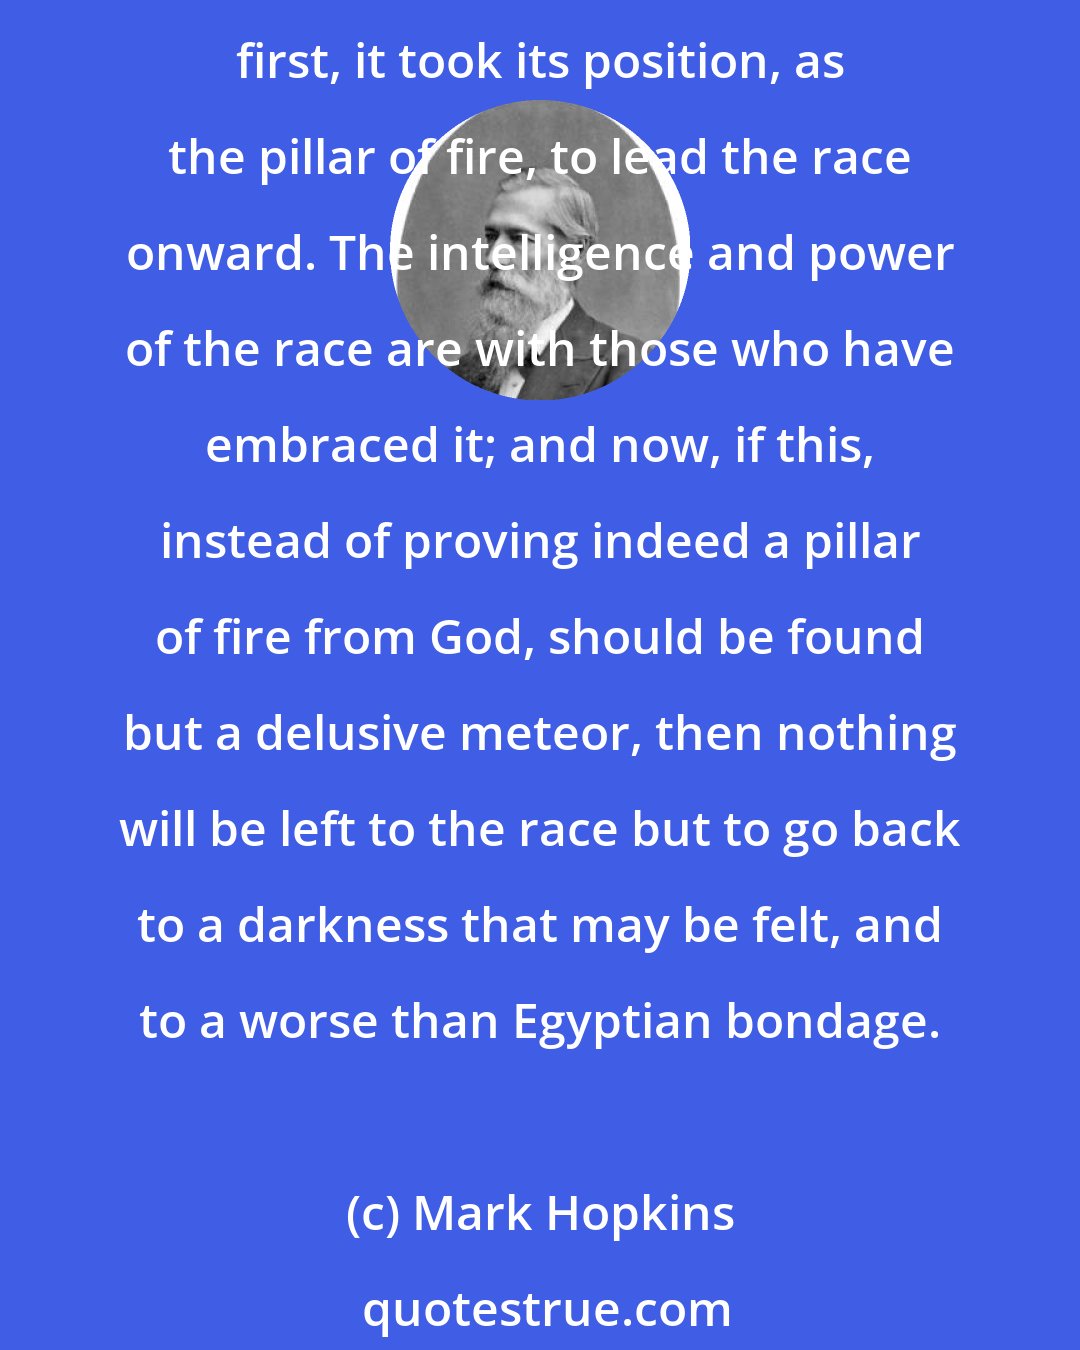 Mark Hopkins: No, there is nothing on the face of the earth that can, for a moment, bear a comparison with Christianity as a religion for man. Upon this the hope of the race hangs. From the very first, it took its position, as the pillar of fire, to lead the race onward. The intelligence and power of the race are with those who have embraced it; and now, if this, instead of proving indeed a pillar of fire from God, should be found but a delusive meteor, then nothing will be left to the race but to go back to a darkness that may be felt, and to a worse than Egyptian bondage.